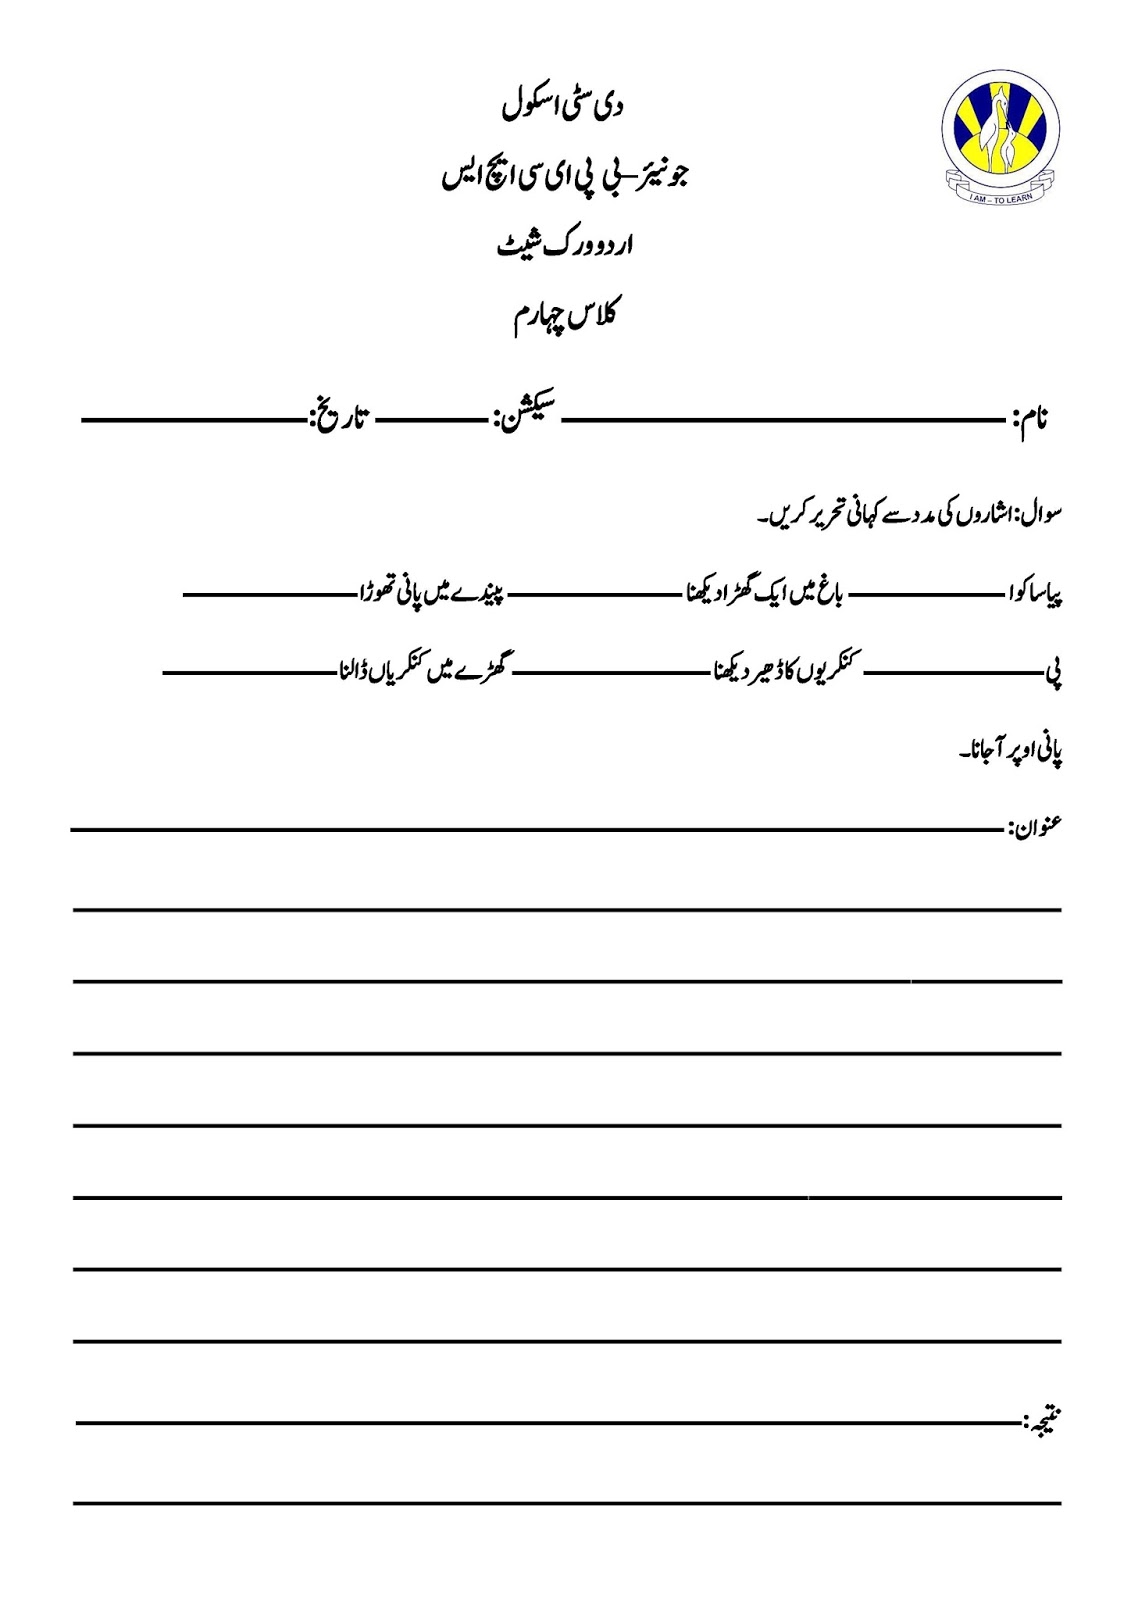 the city school worksheet for class 4 science s s t english urdu maths